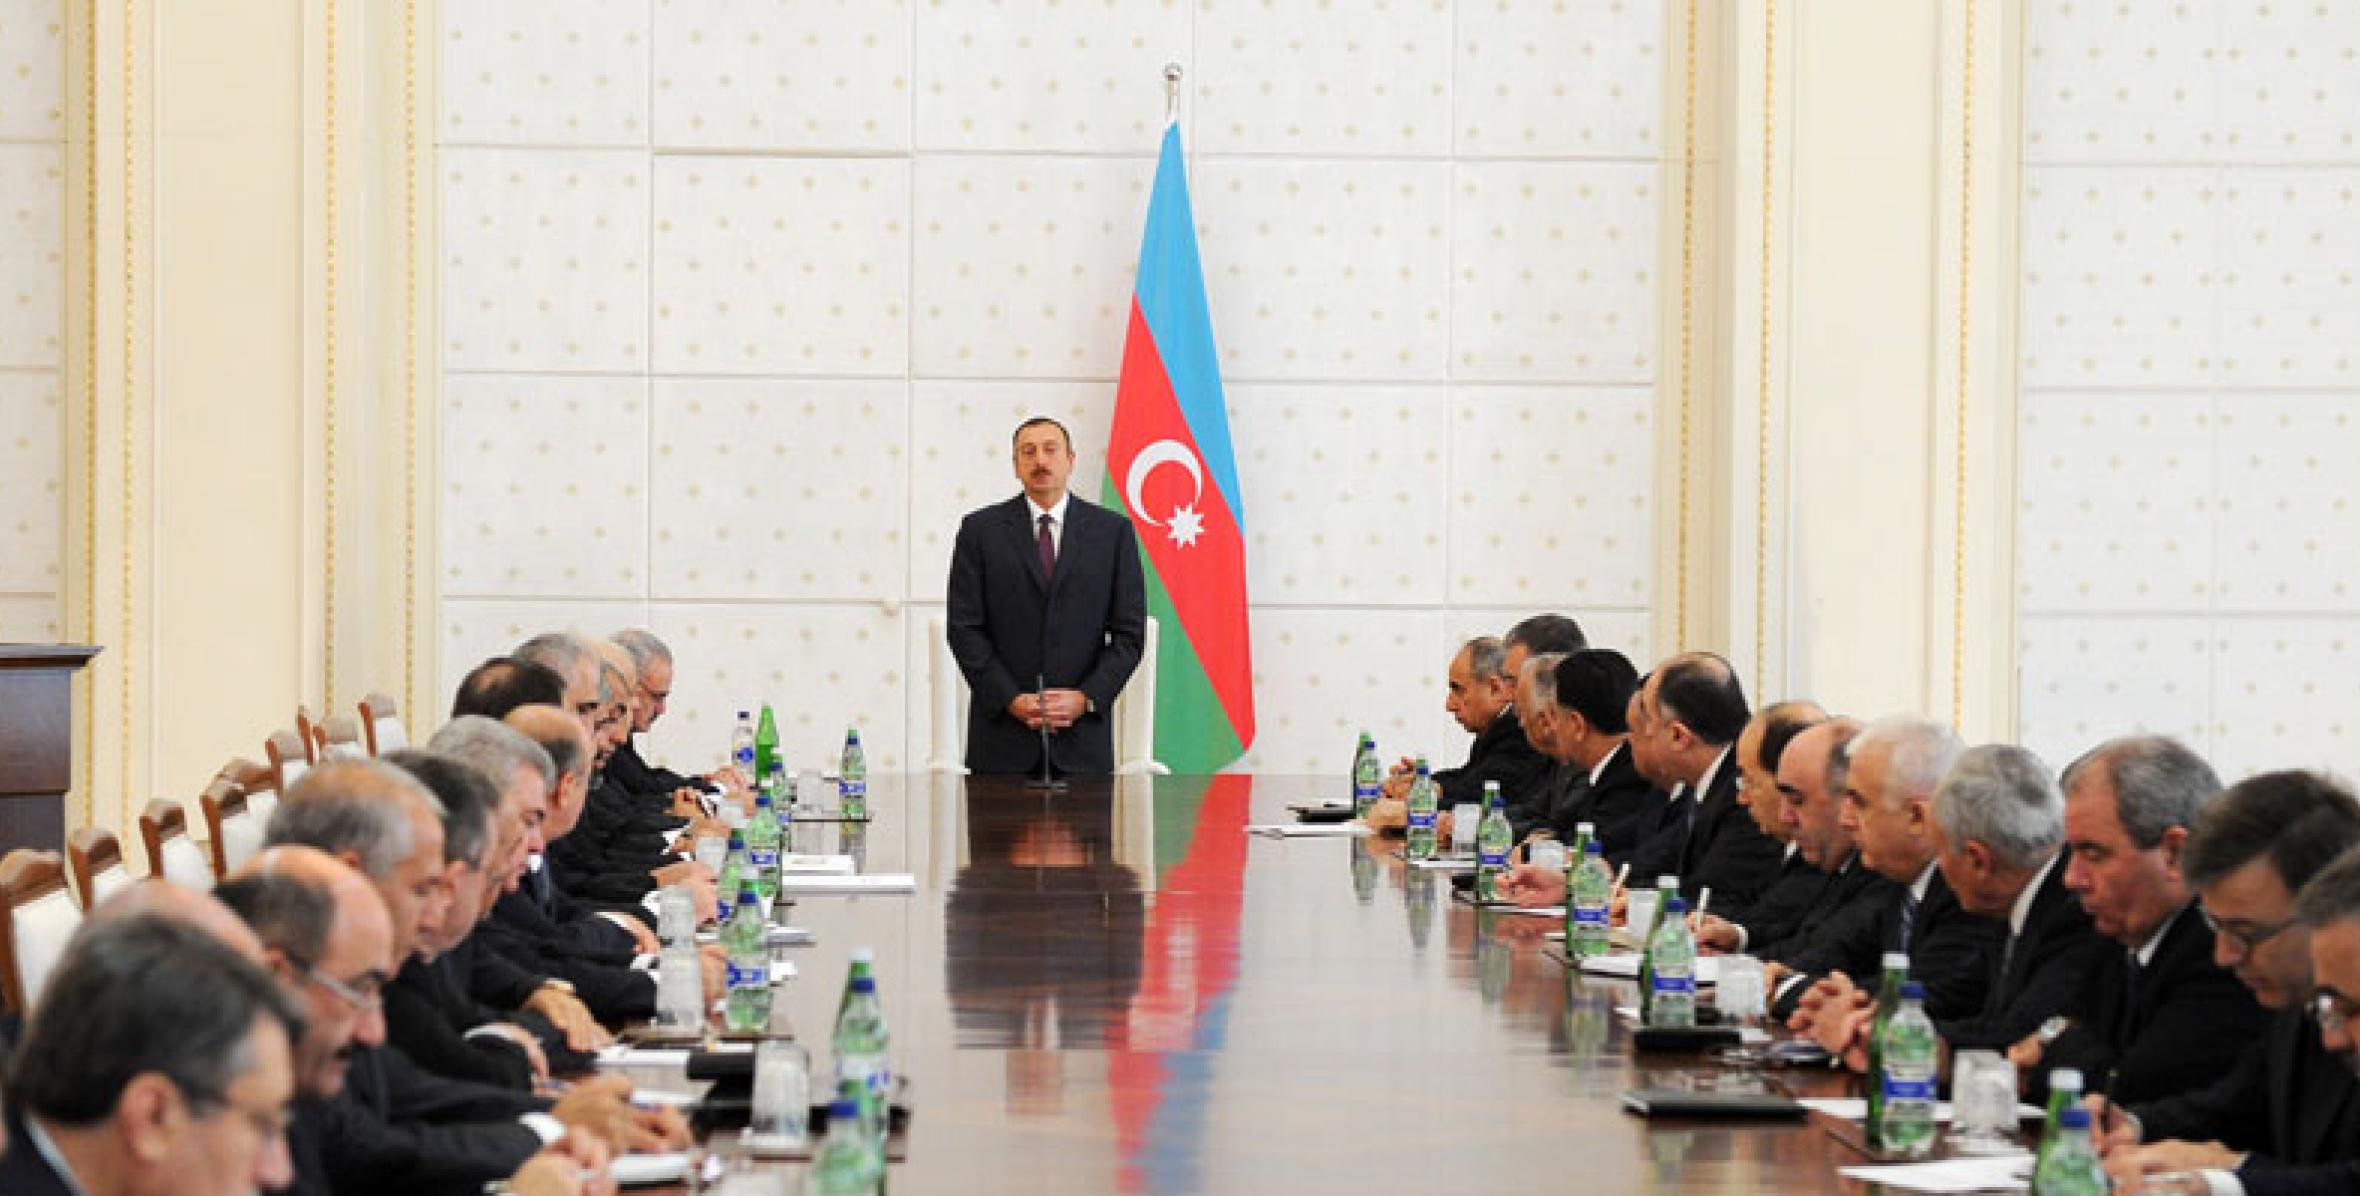 Expanded meeting of the Cabinet of Minister chaired by President Ilham Aliyev was held